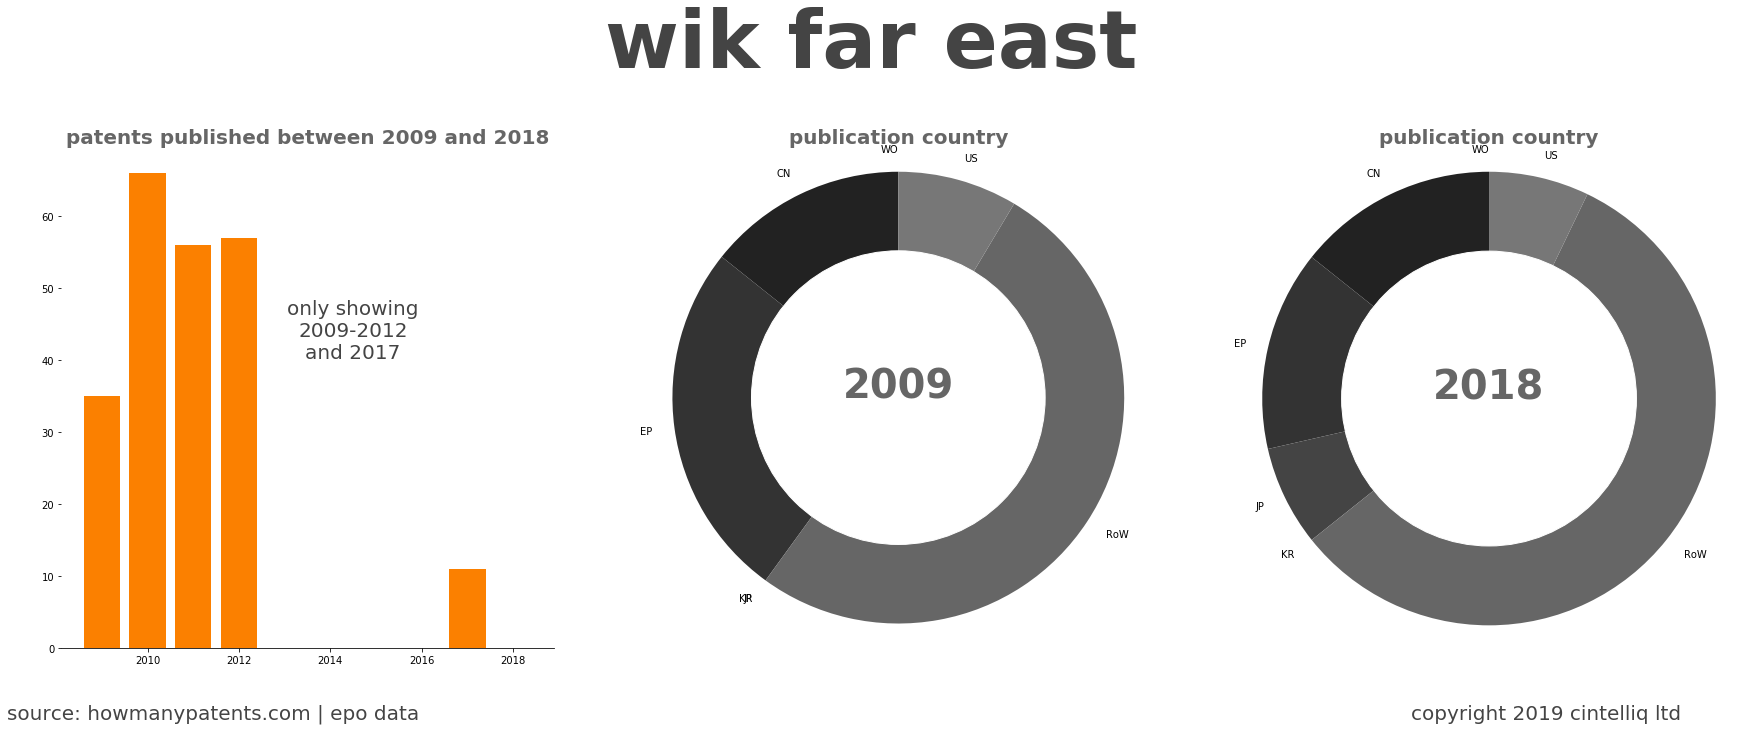 summary of patents for Wik Far East